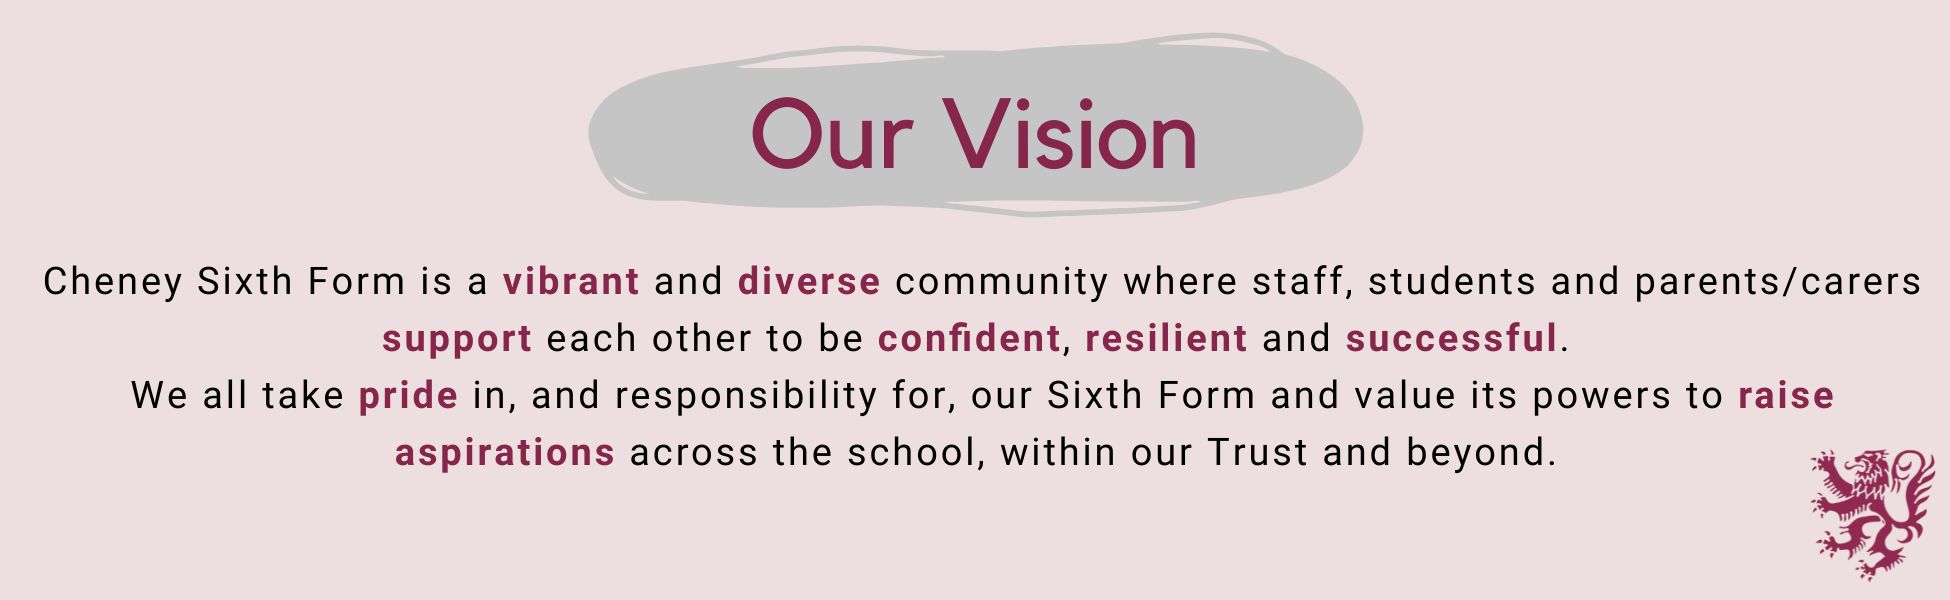 Sixth Form Vision Graphic